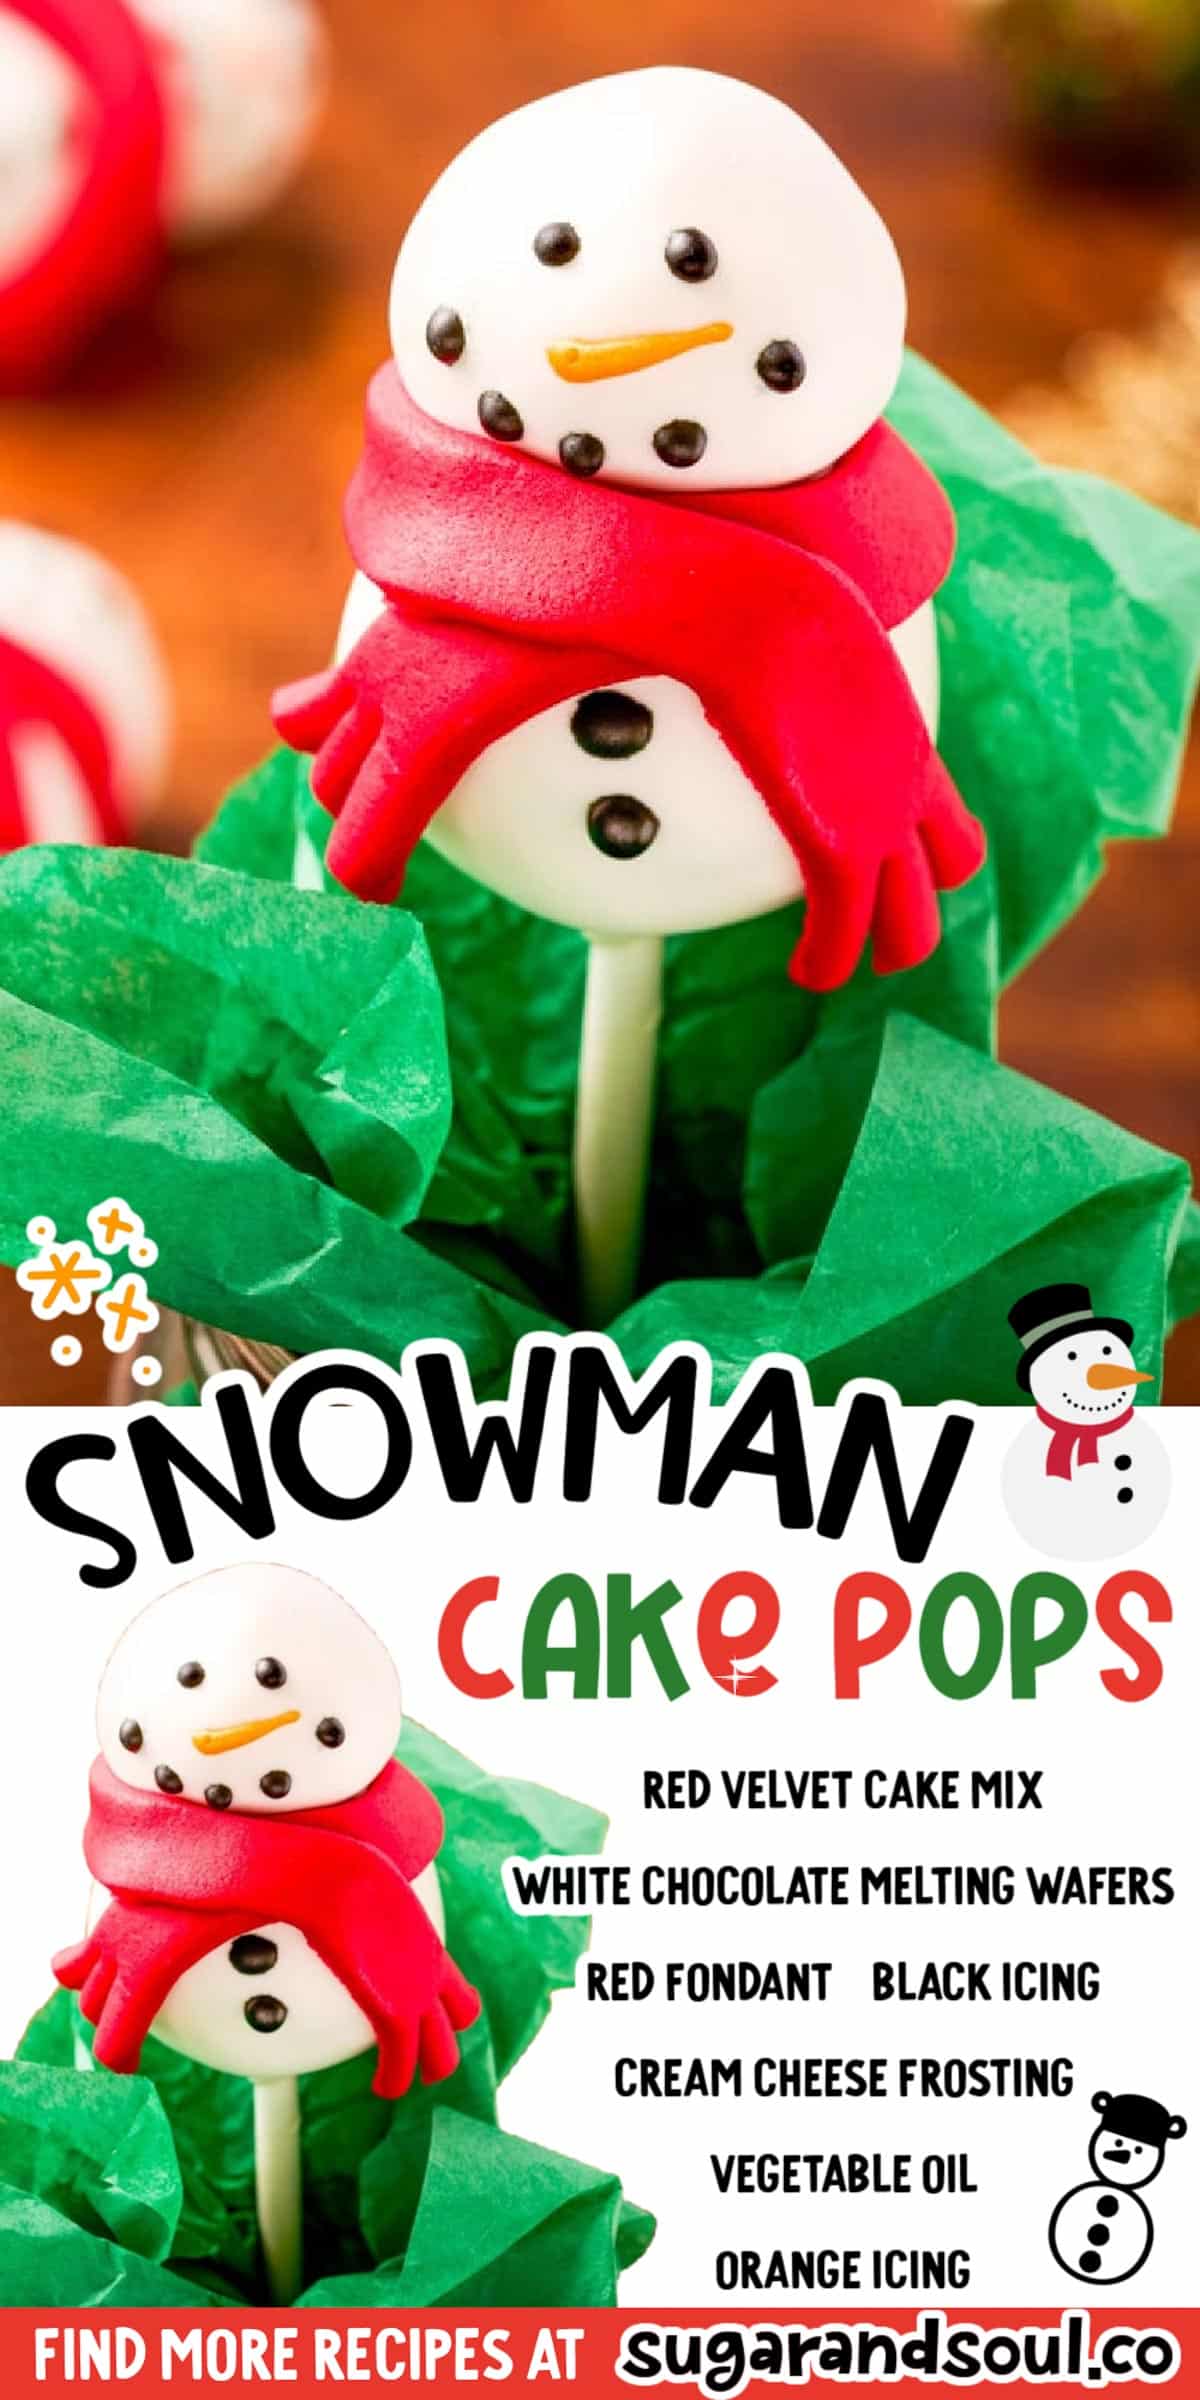 Make a Snowman Cake! - Sweet Party Place